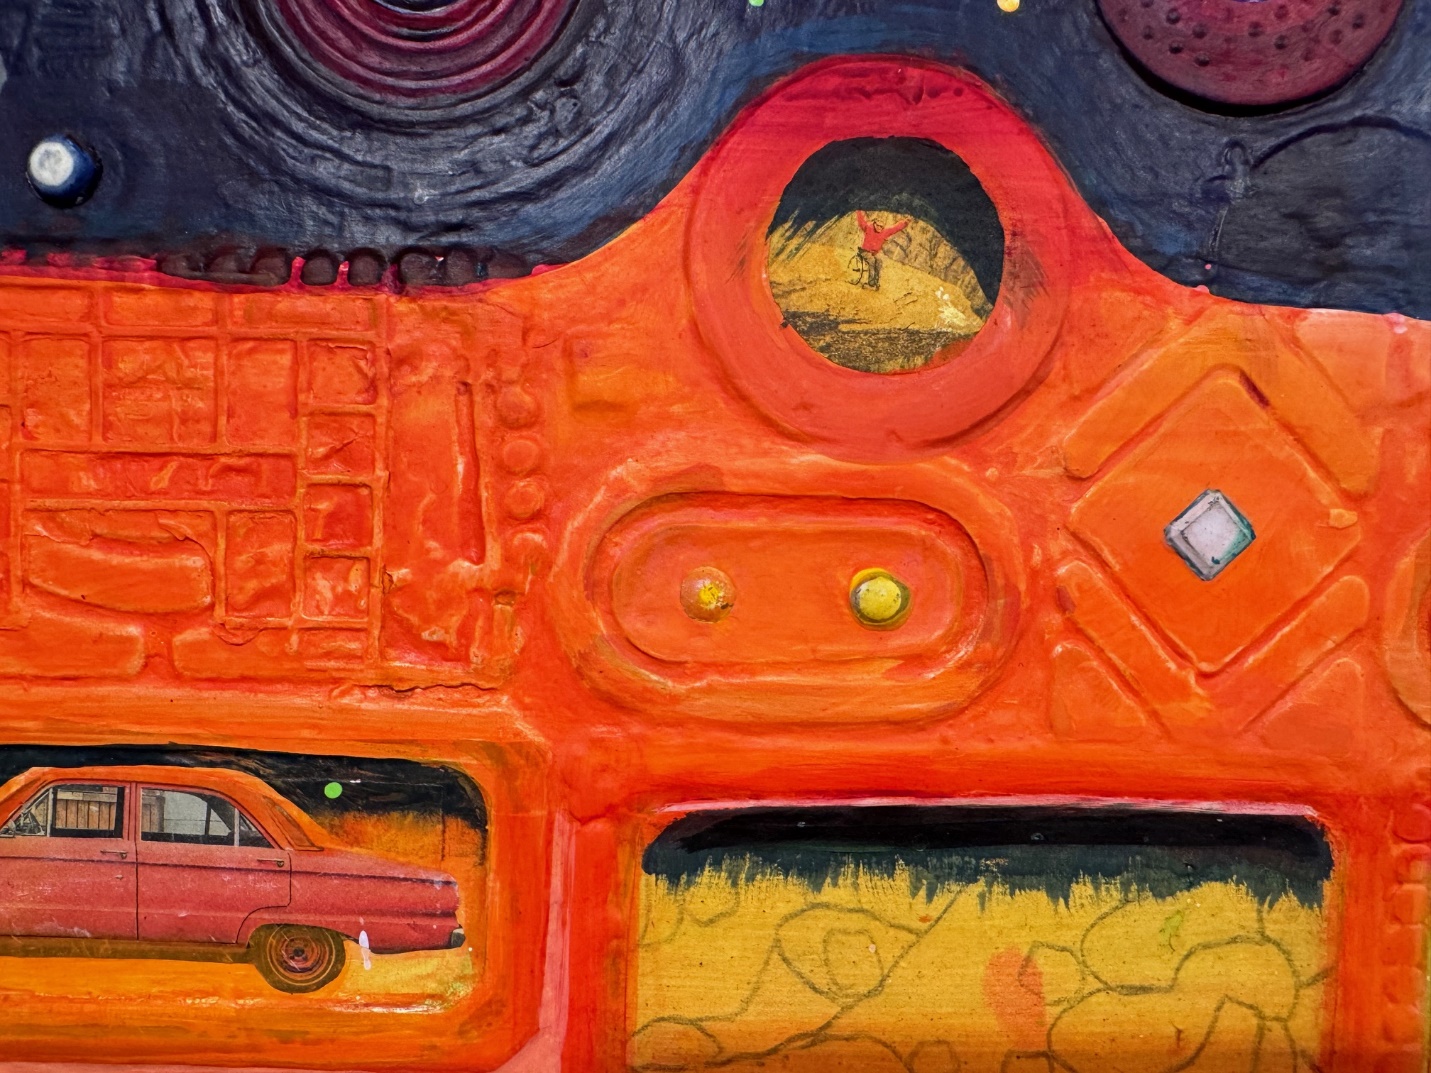 A colorful art piece with a car in the middle

Description automatically generated